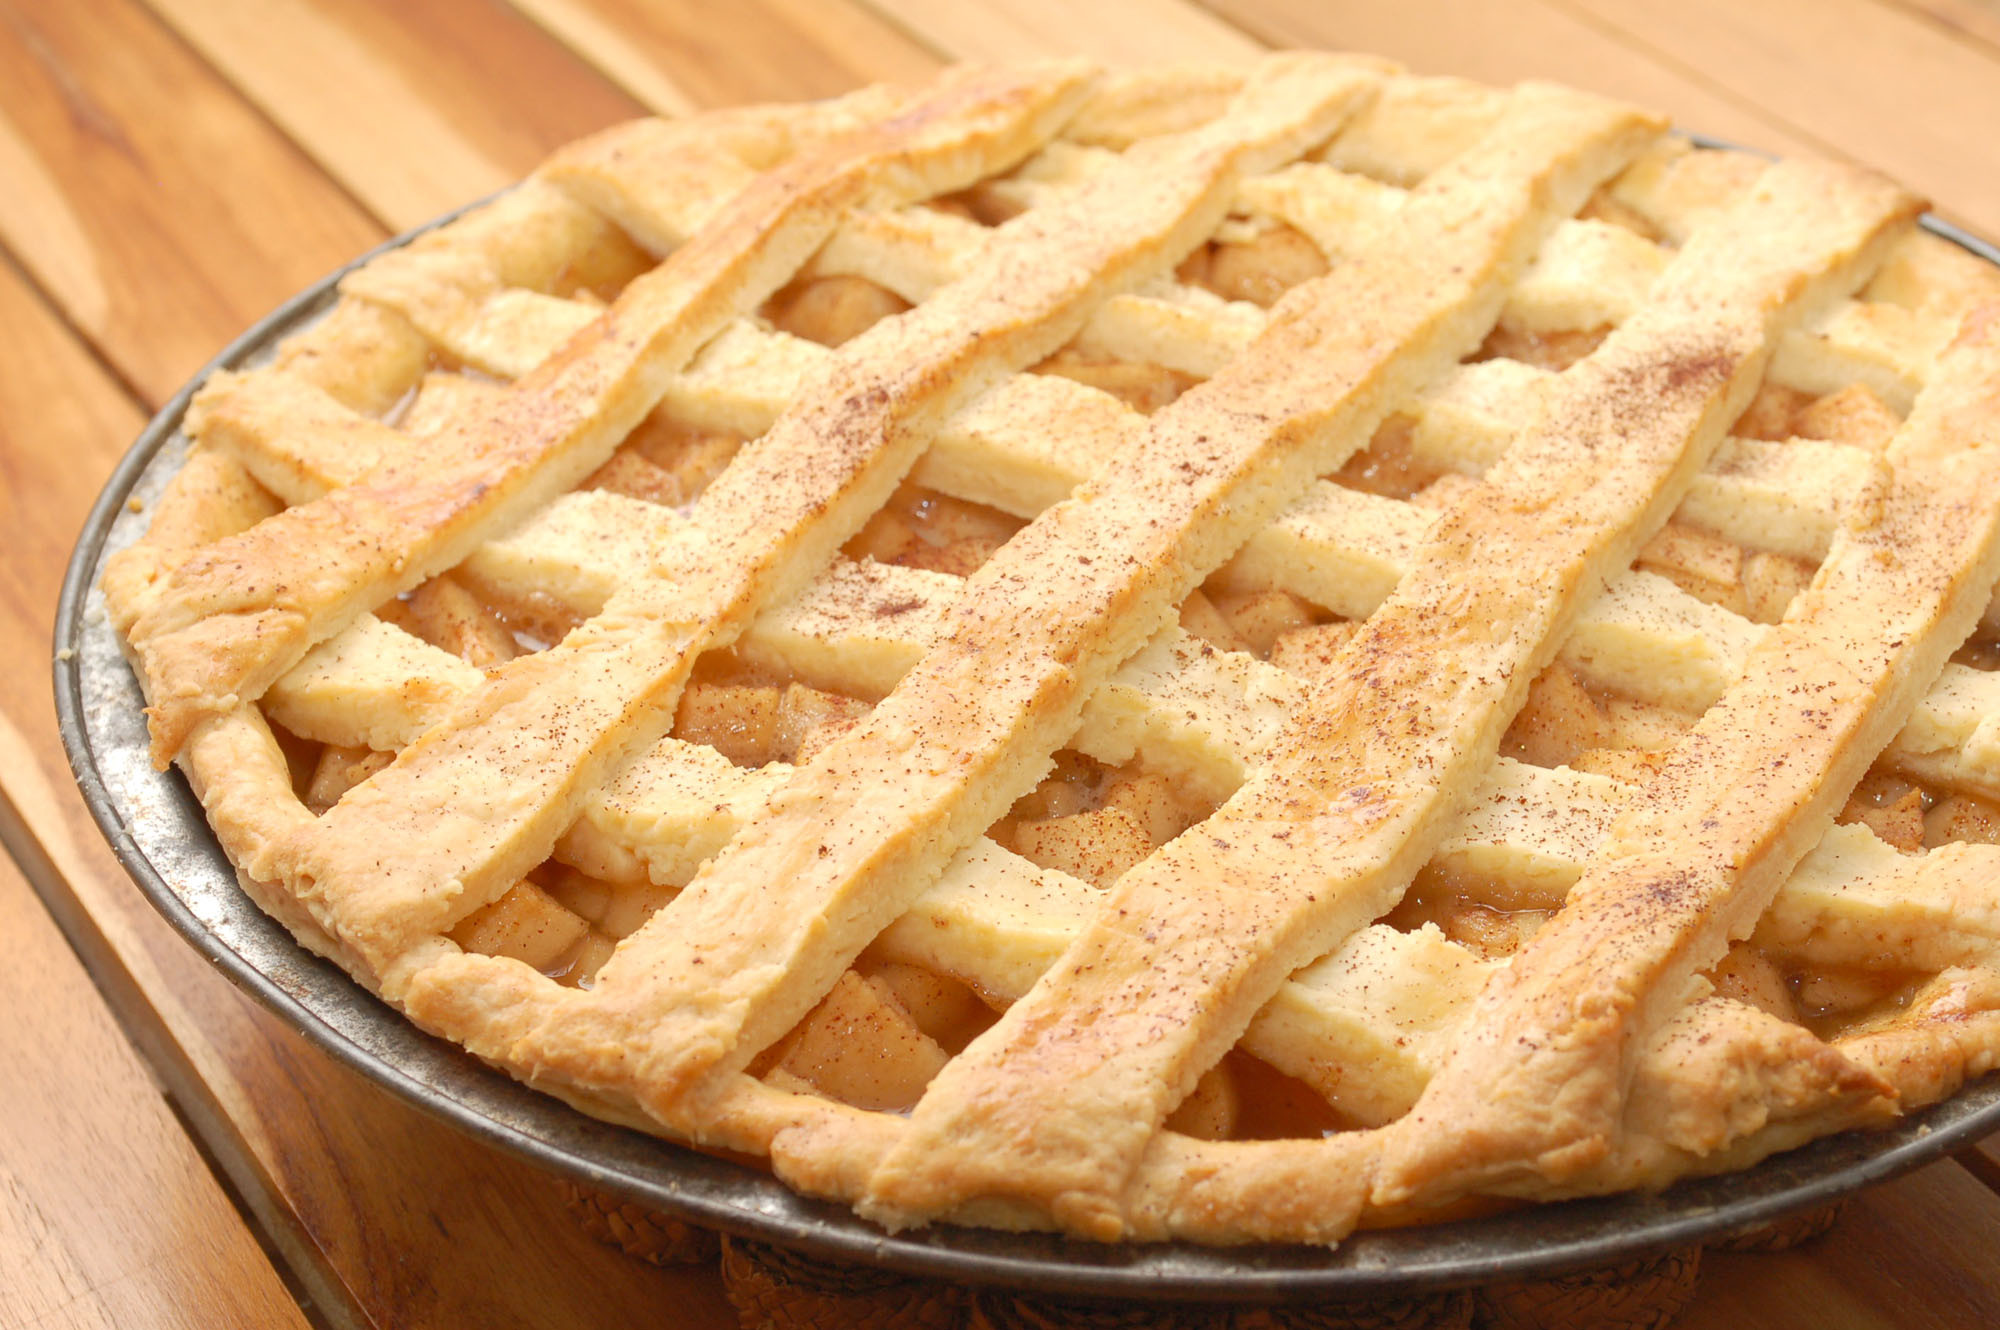 How To Make An Apple Pie
 How to Bake an Apple Pie from Scratch with